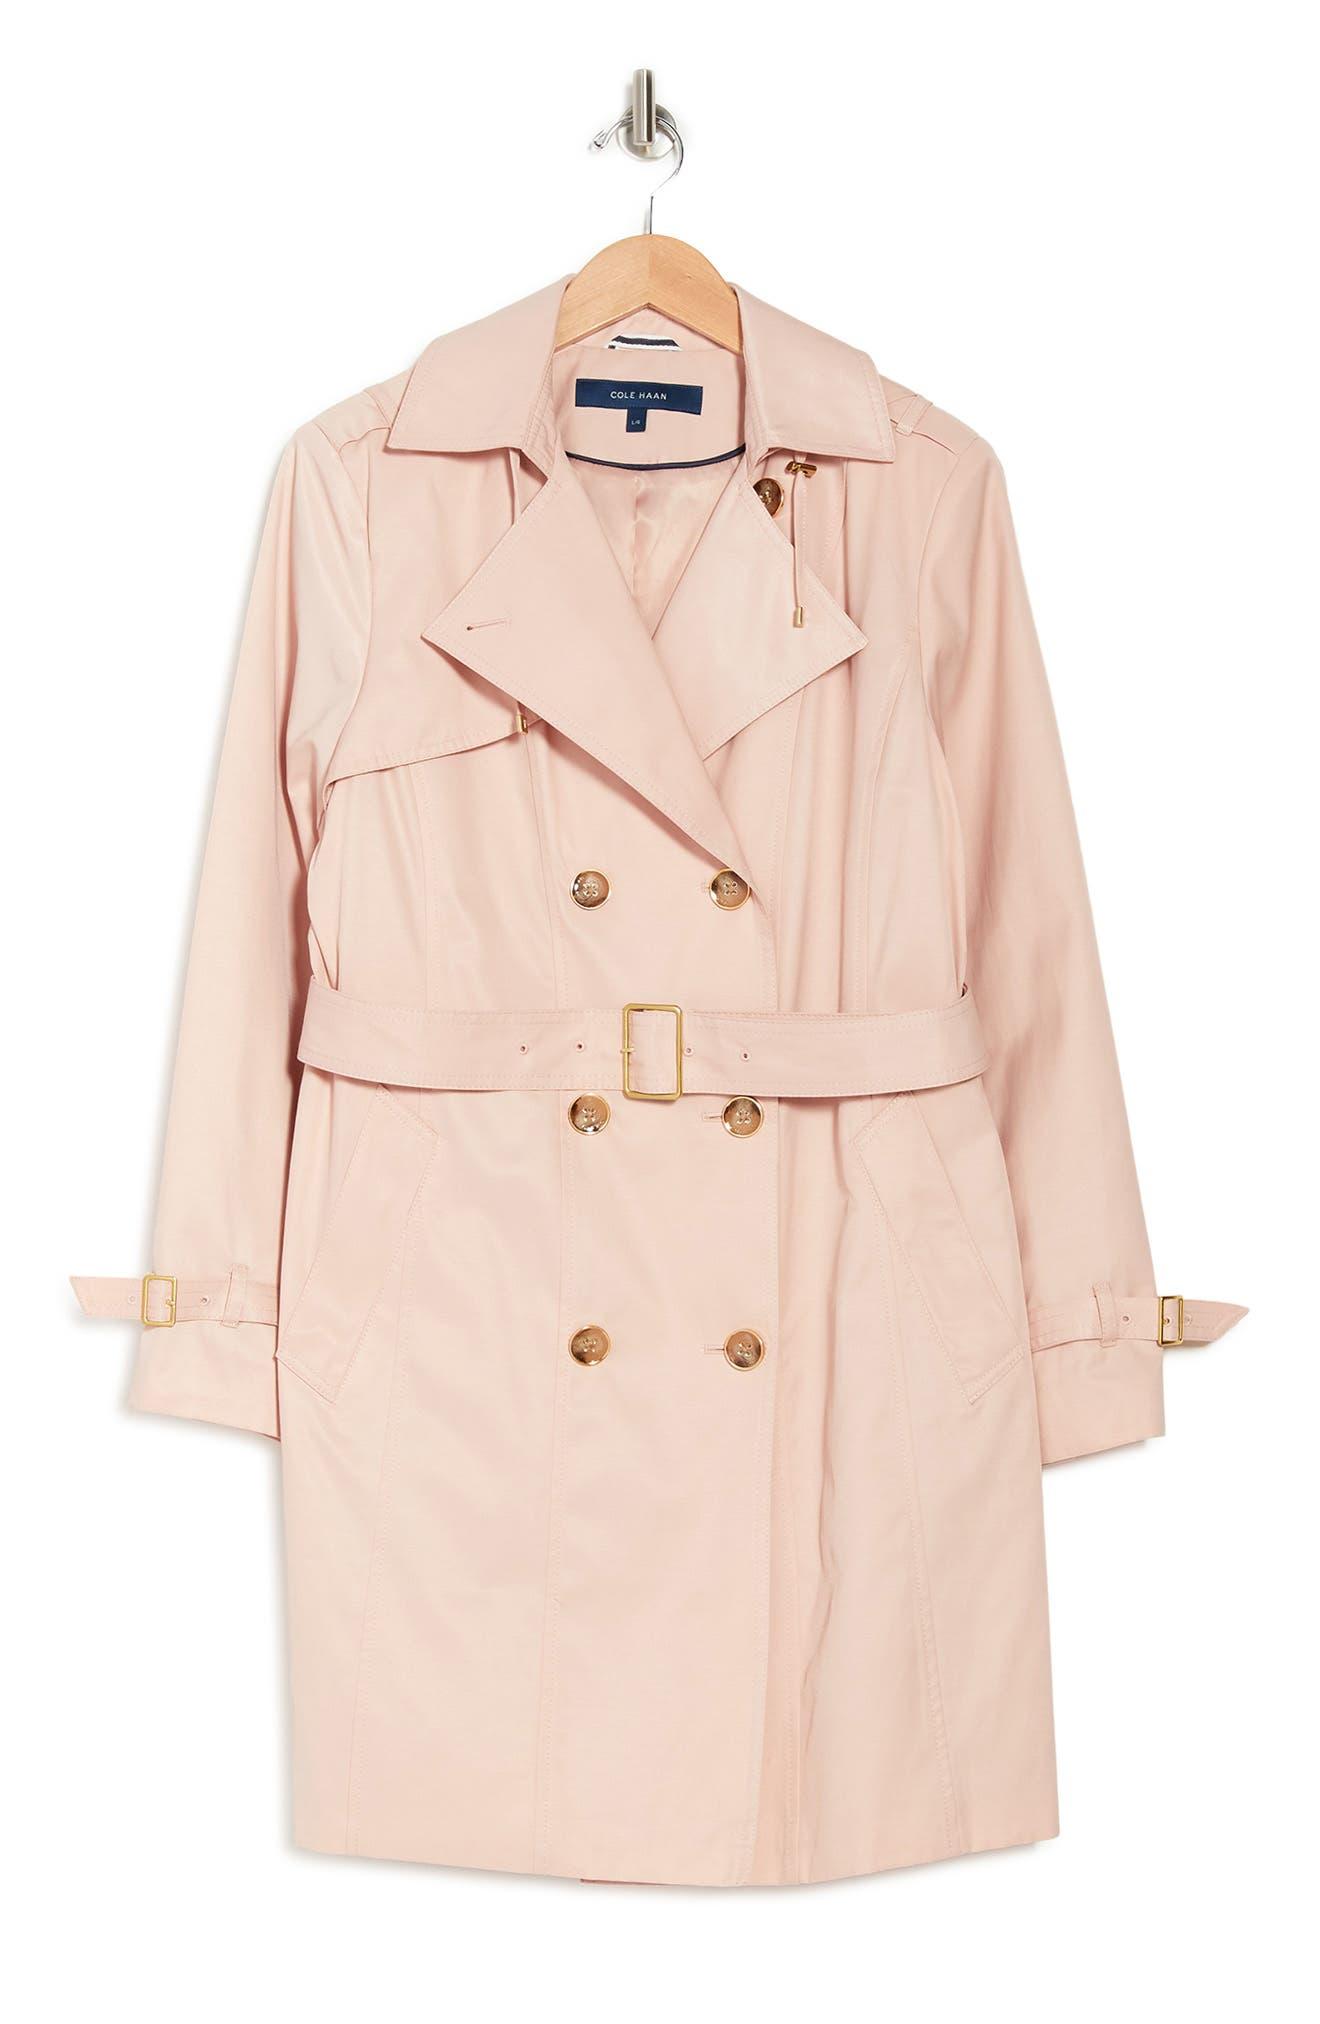 Cole Haan Womens Double Breasted Trench Coat Rain Jacket